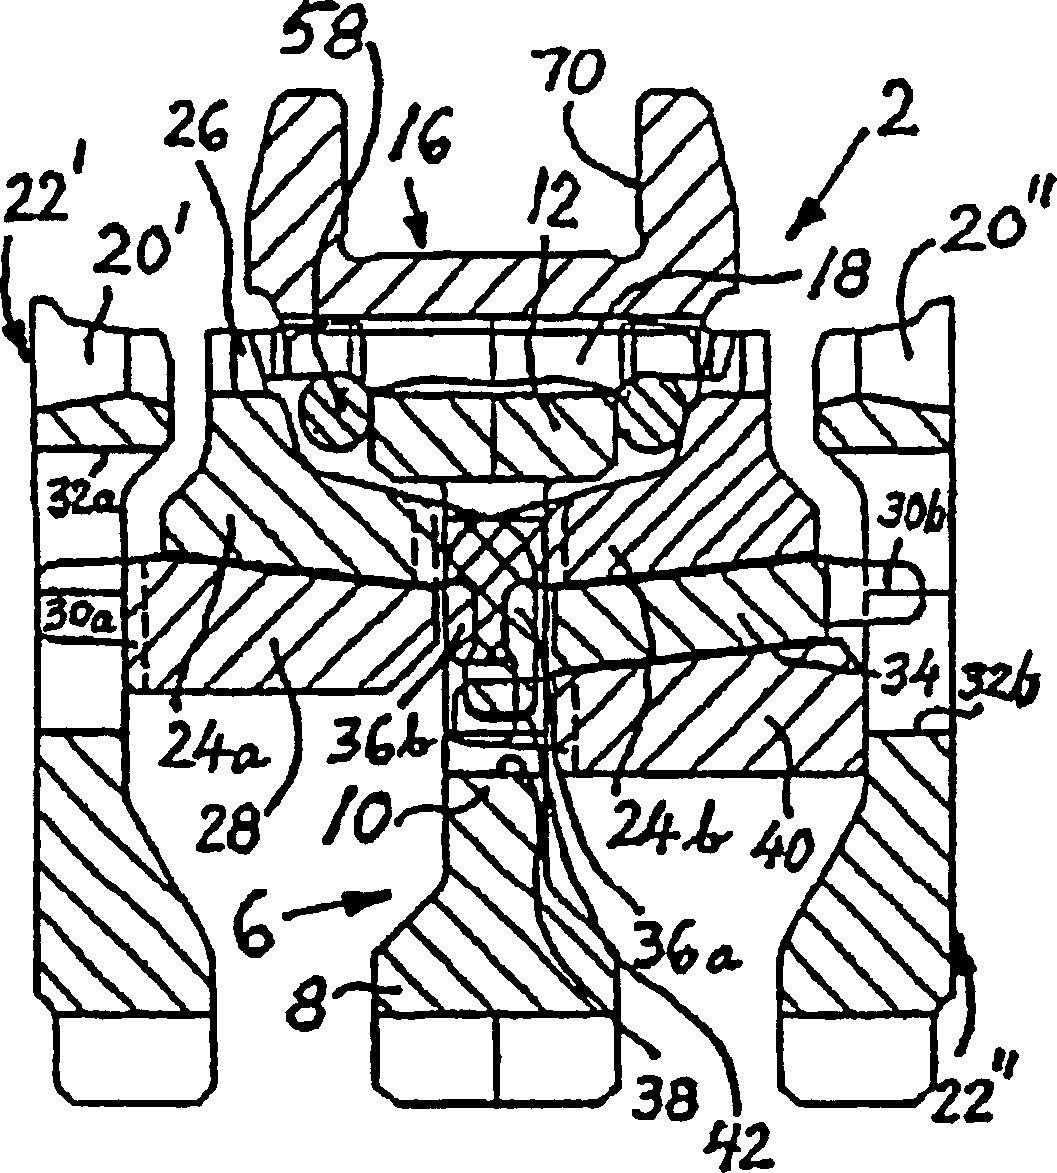 Assembly system for synchronizing devices in a gearbox